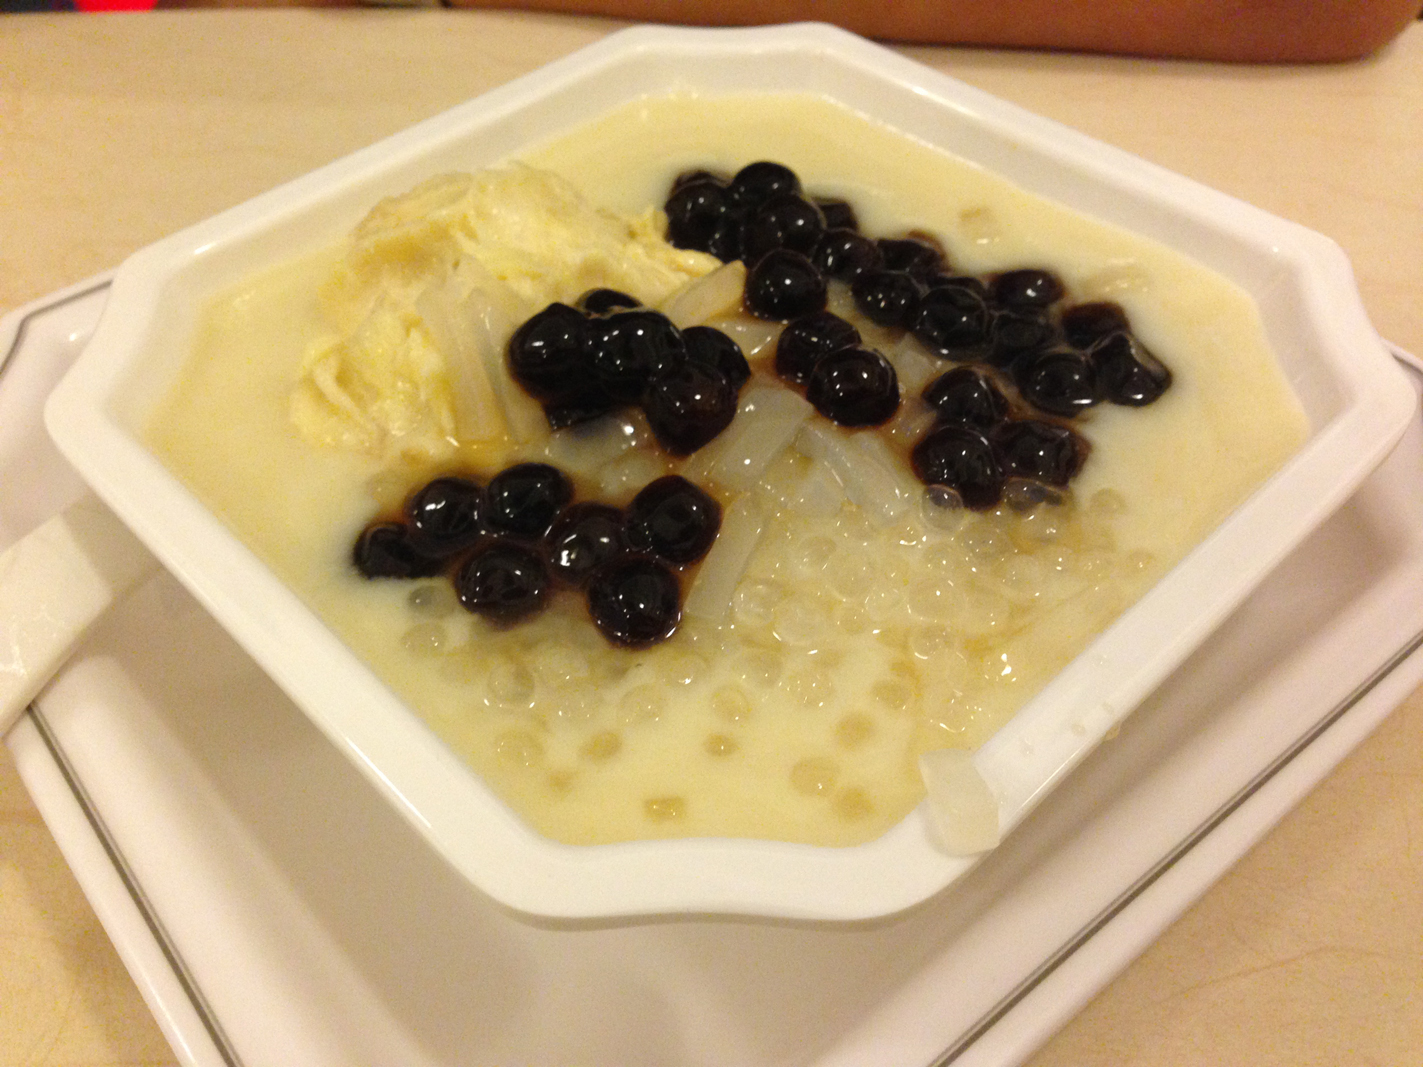 This was the dessert my dad ordered. Durian and tapioca balls + other things. It was REALLY good. Although a fair warning, this place did smell strongly of durian, so durian haters steer clear!